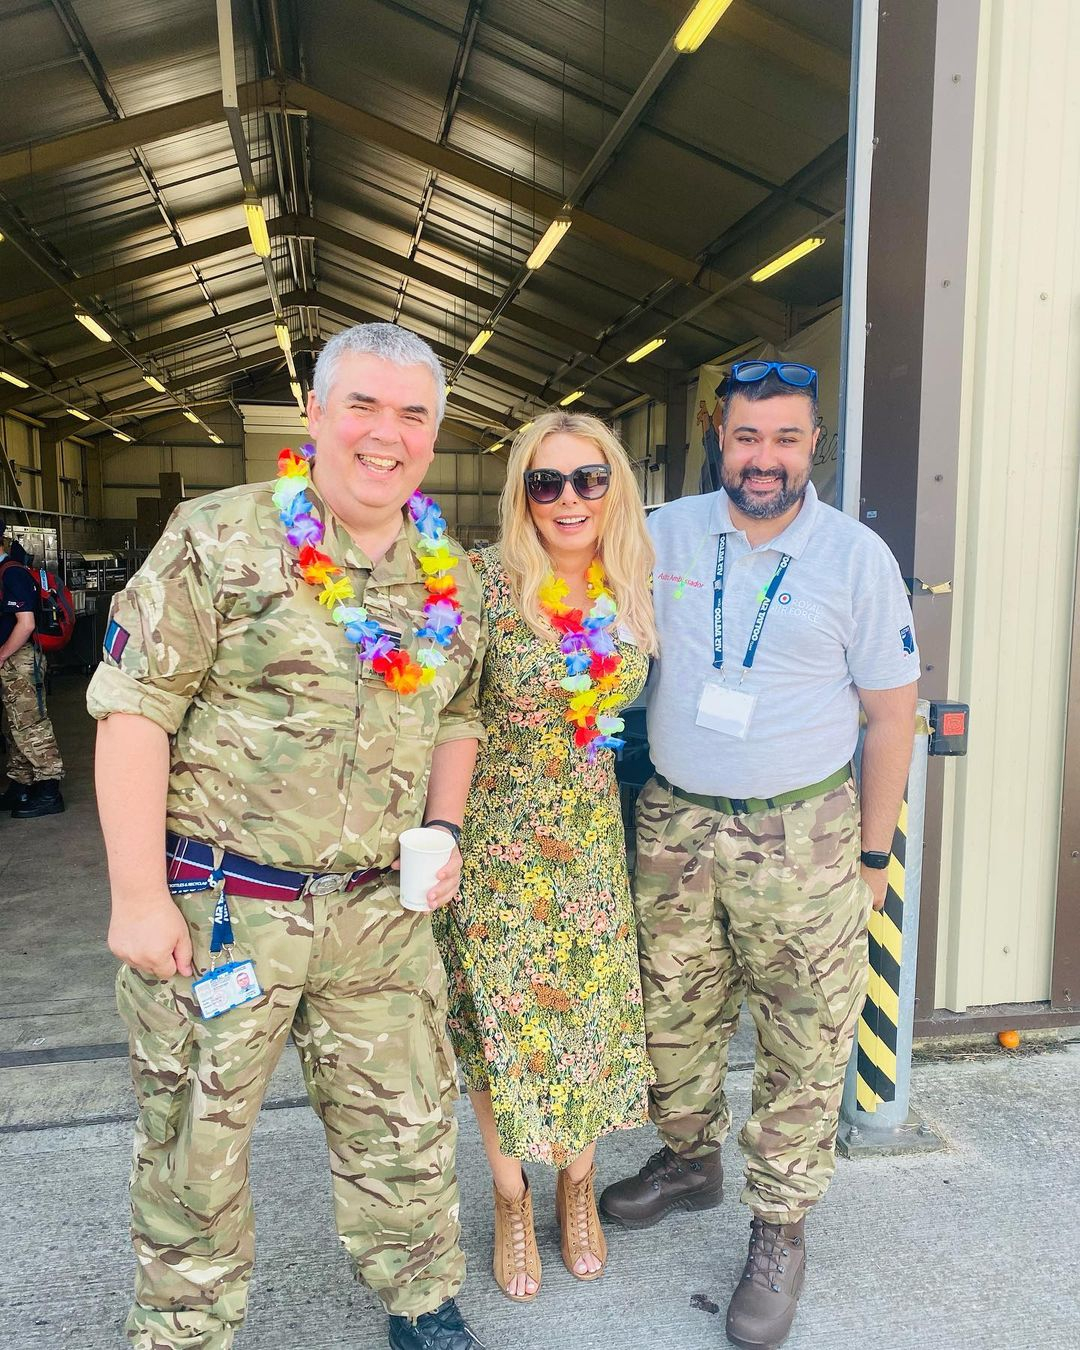 Carol Vorderman sends fans wild as she poses in lowrise dress at RAF air base